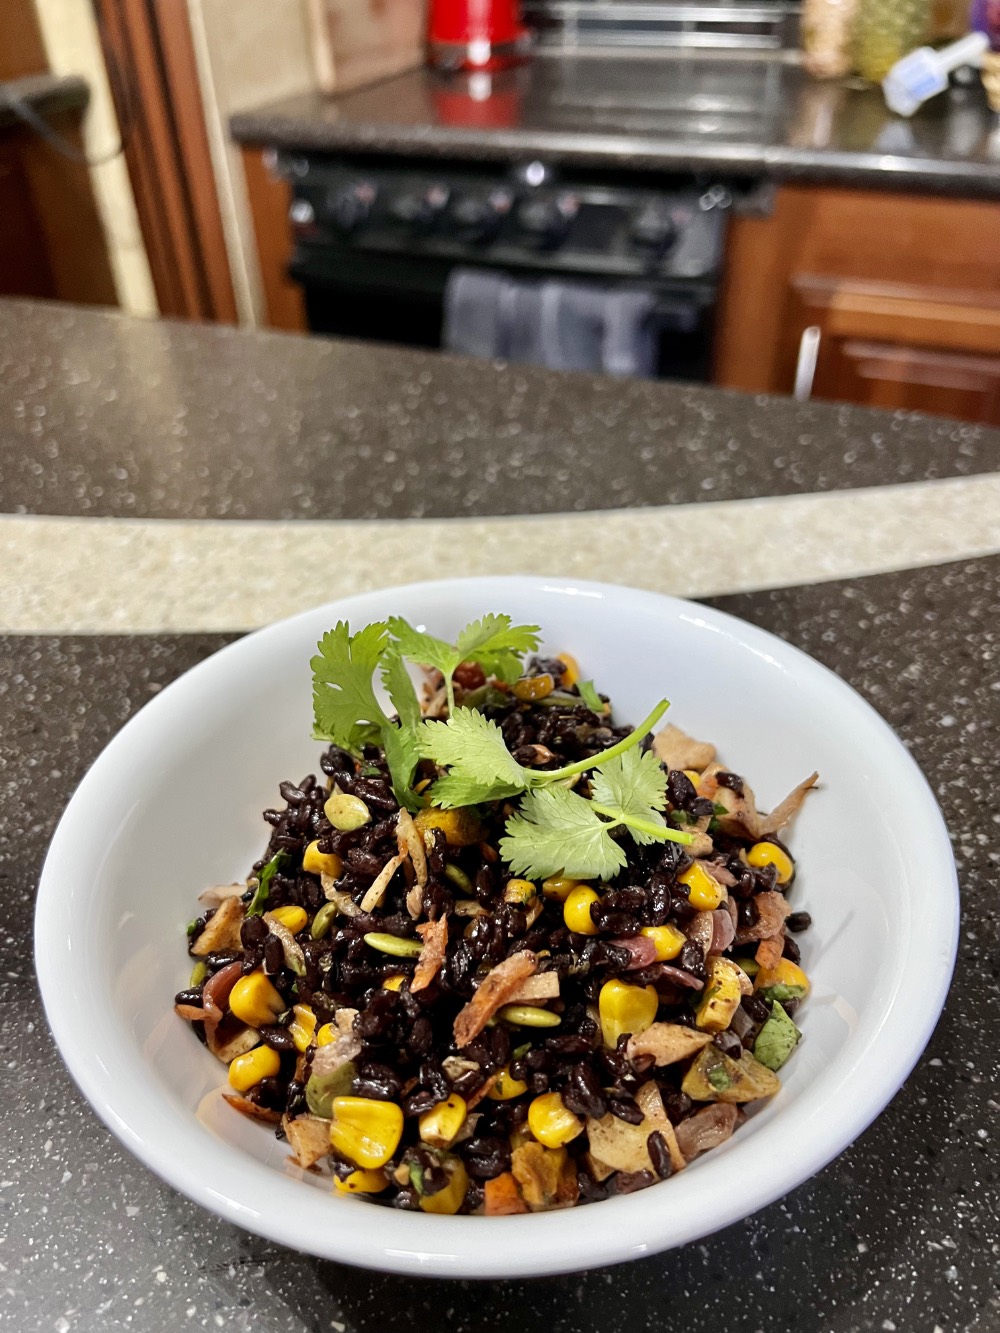 autumn black rice salad in a white bowl with a sprig of cilantro on a counter.